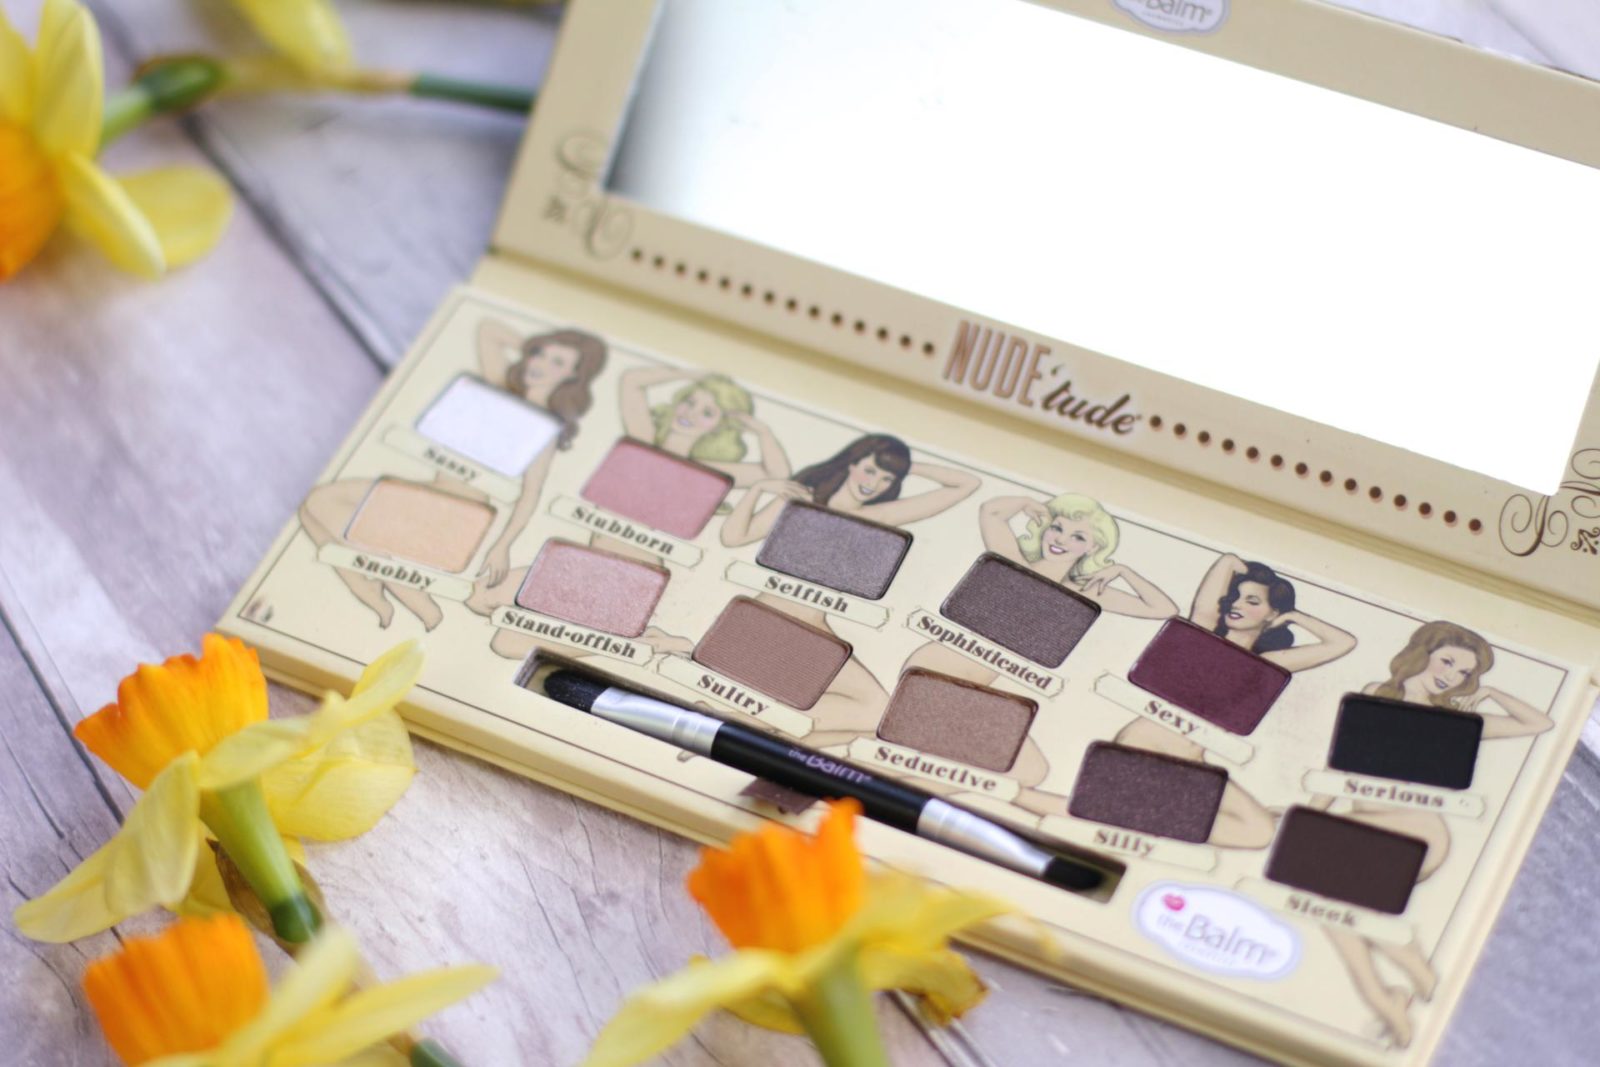 Thebalm Nudetude Eyeshadow Palette Review And Swatches